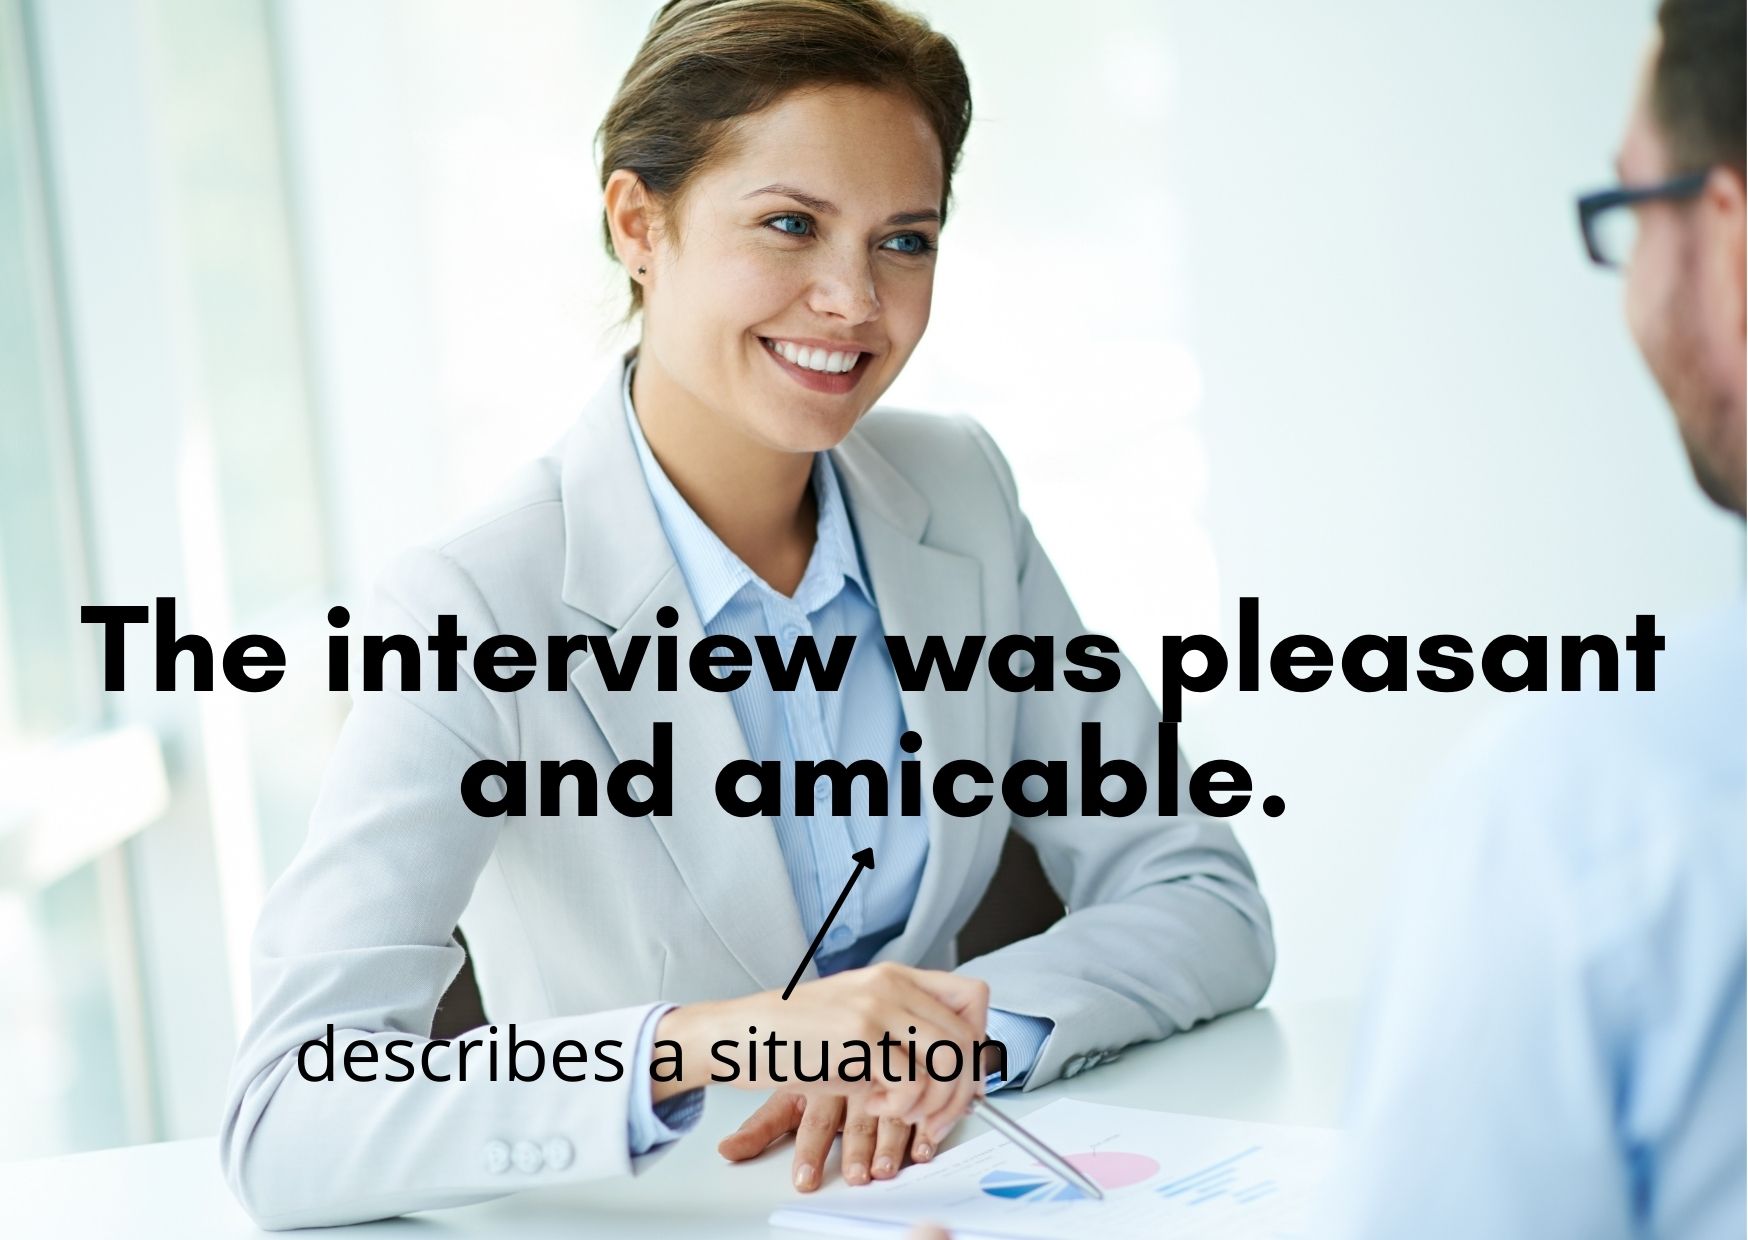 Graphic describing amiable vs. amicable but showing an example of the use of amicable: "The interview was pleasant and amicable"